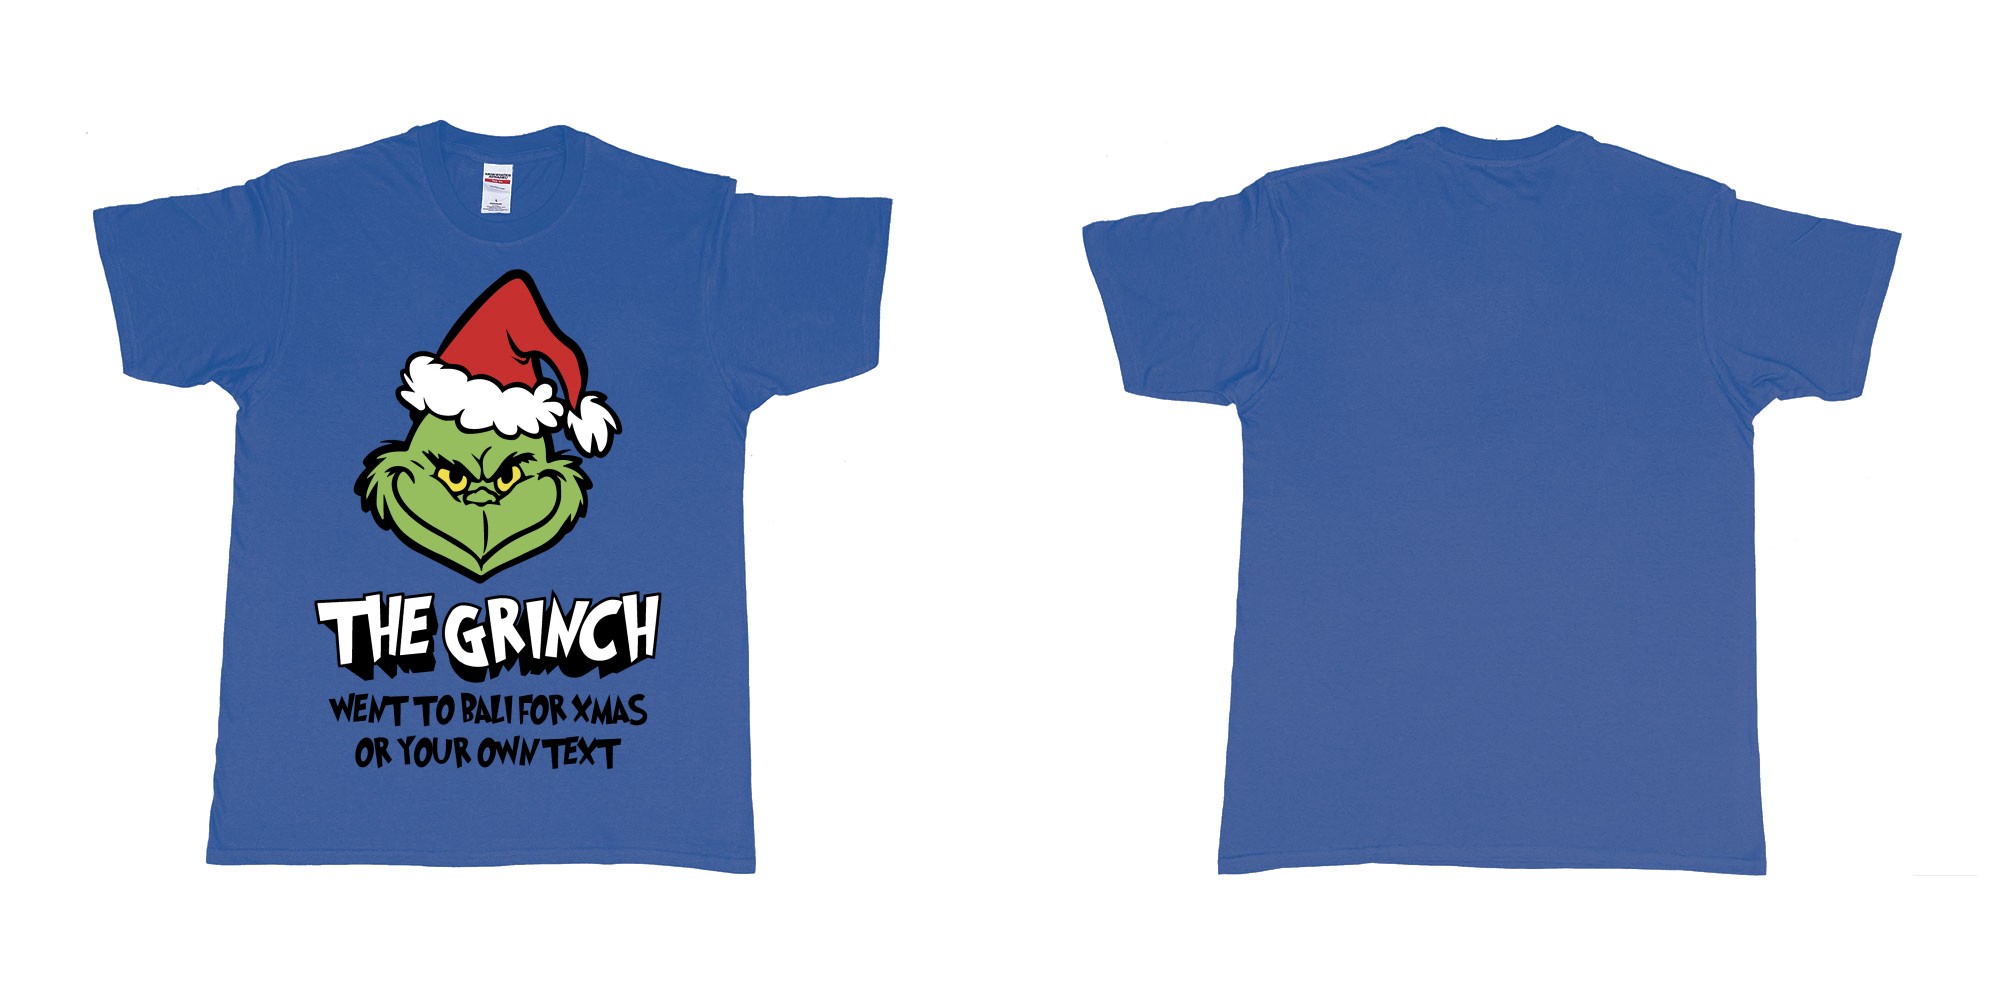 Custom tshirt design the grinch went to bali for xmas tshirt in fabric color royal-blue choice your own text made in Bali by The Pirate Way